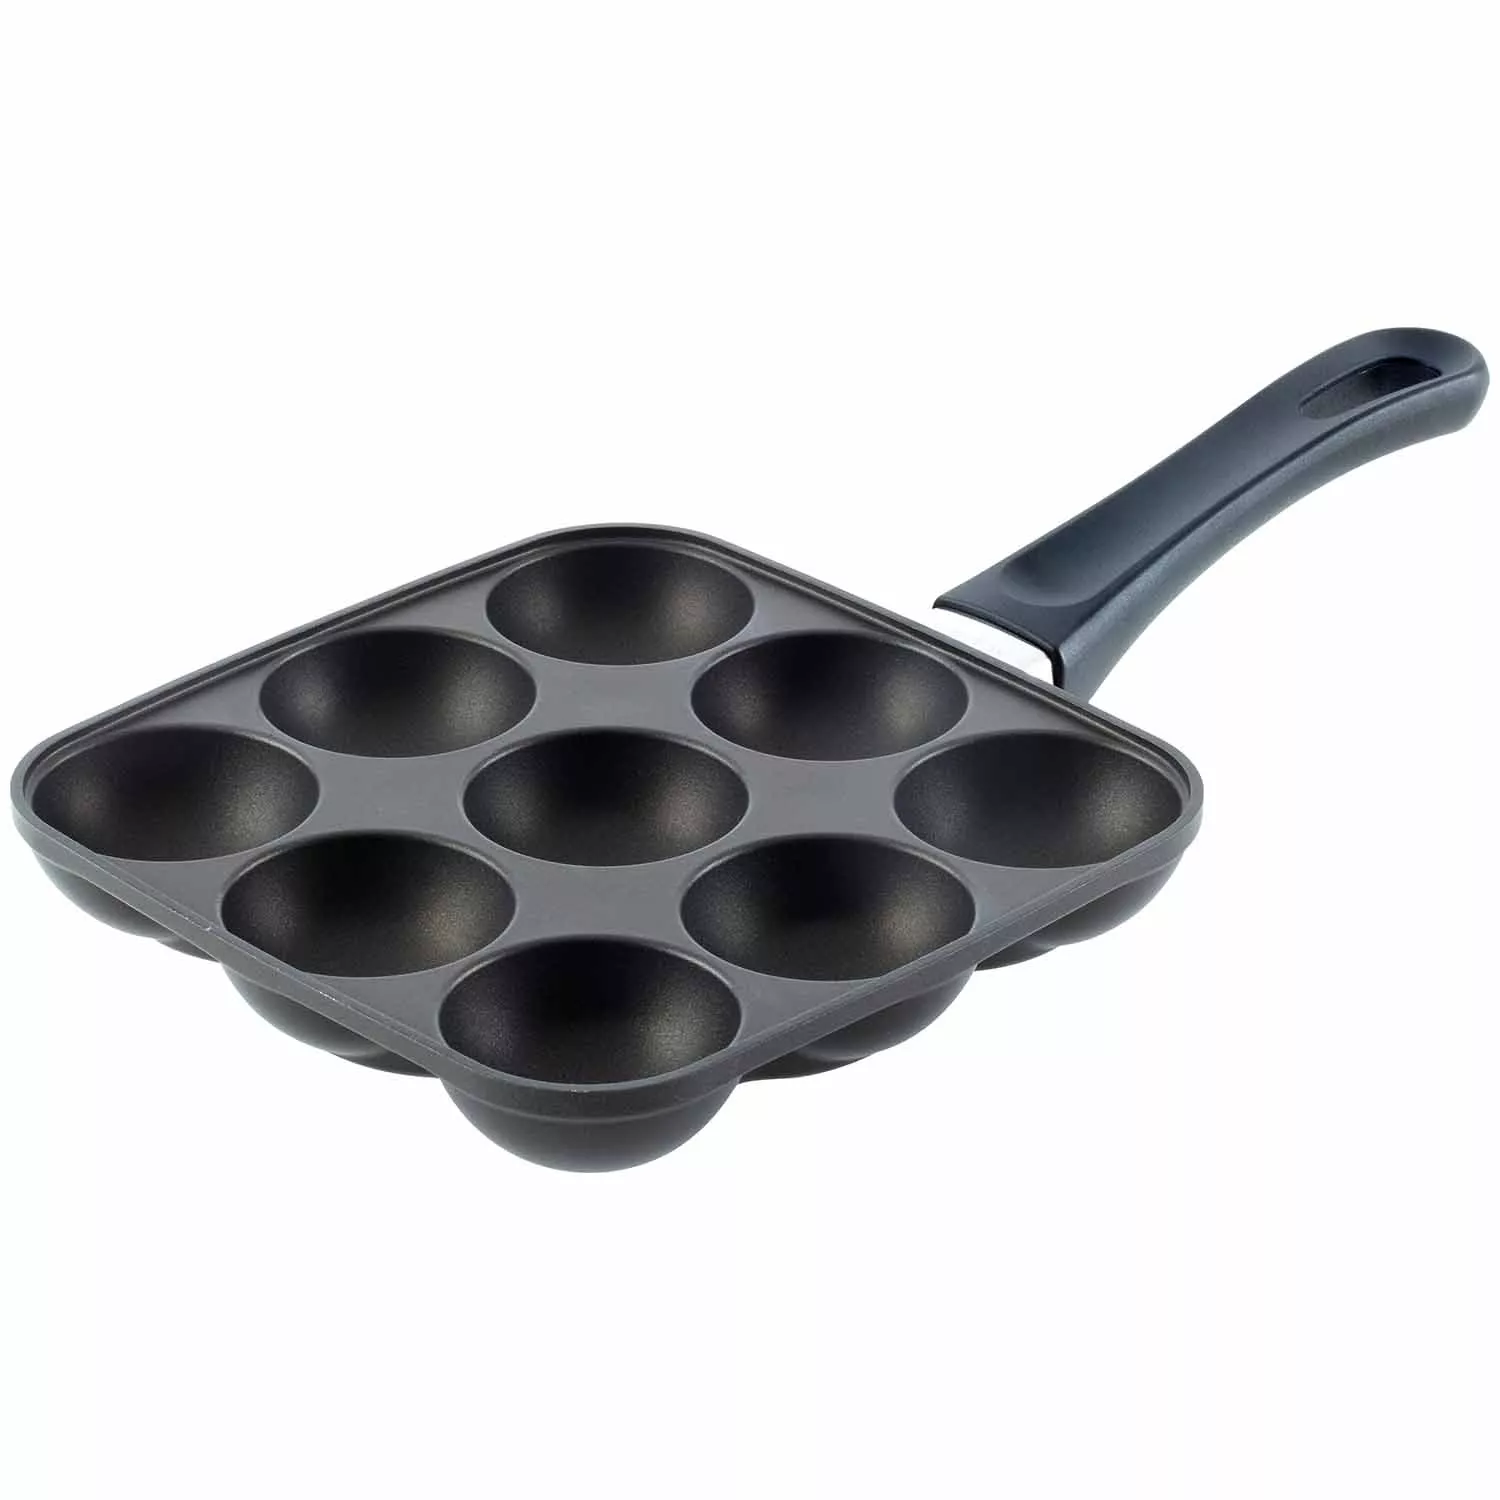 8 Things to Cook in an Aebleskiver Pan